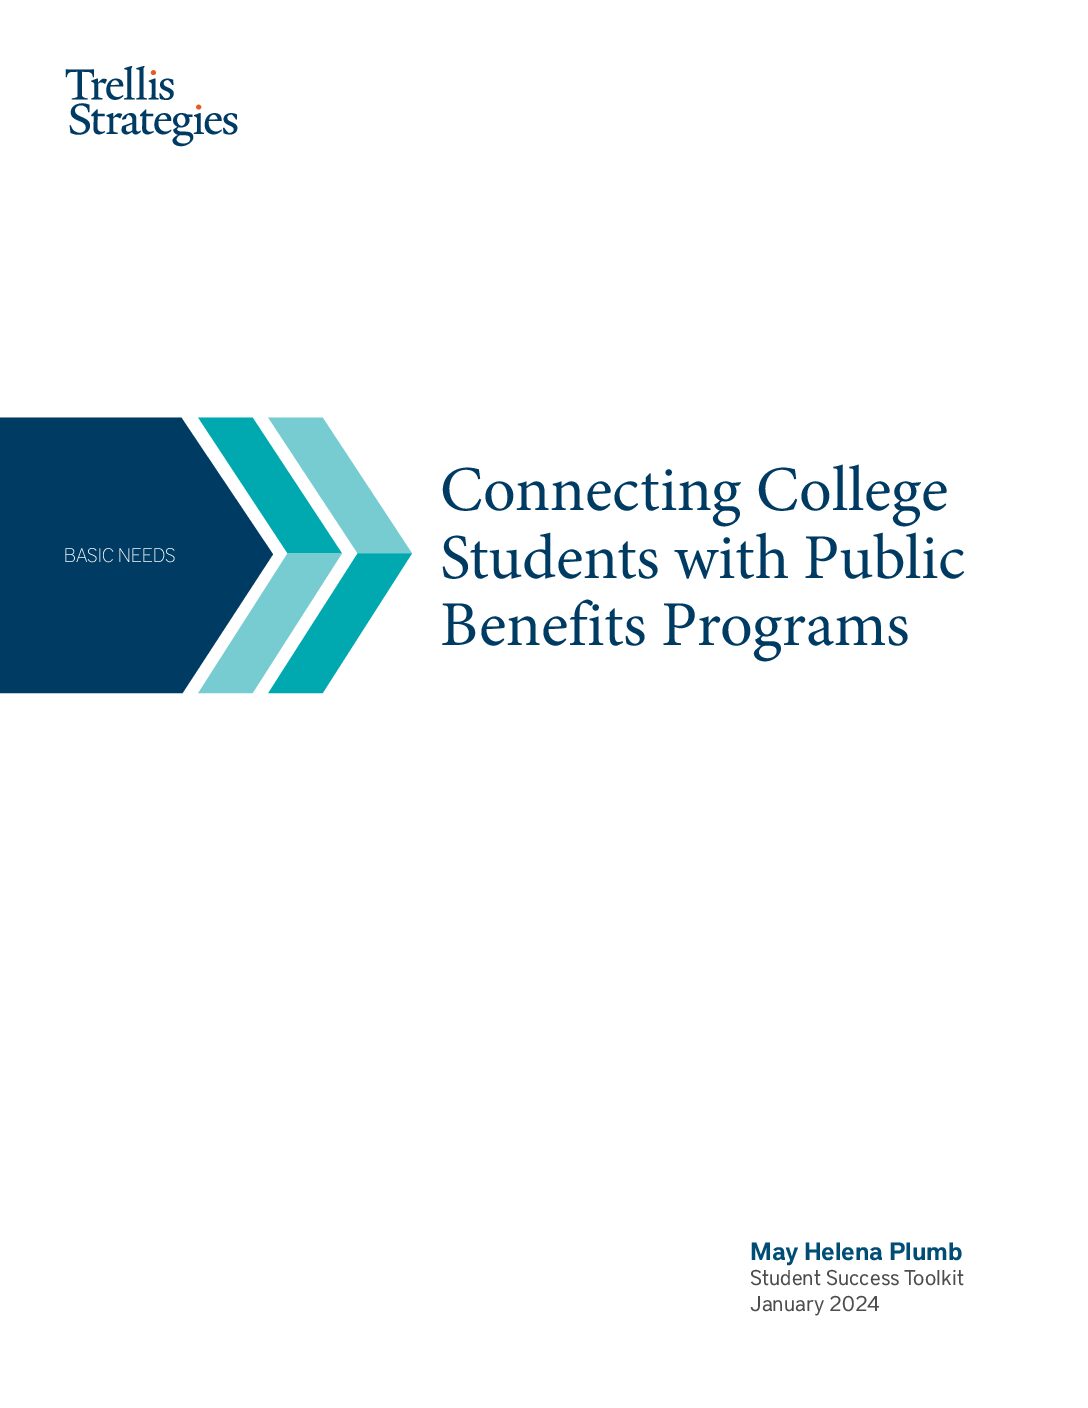 Connecting College Students with Public Benefits Programs